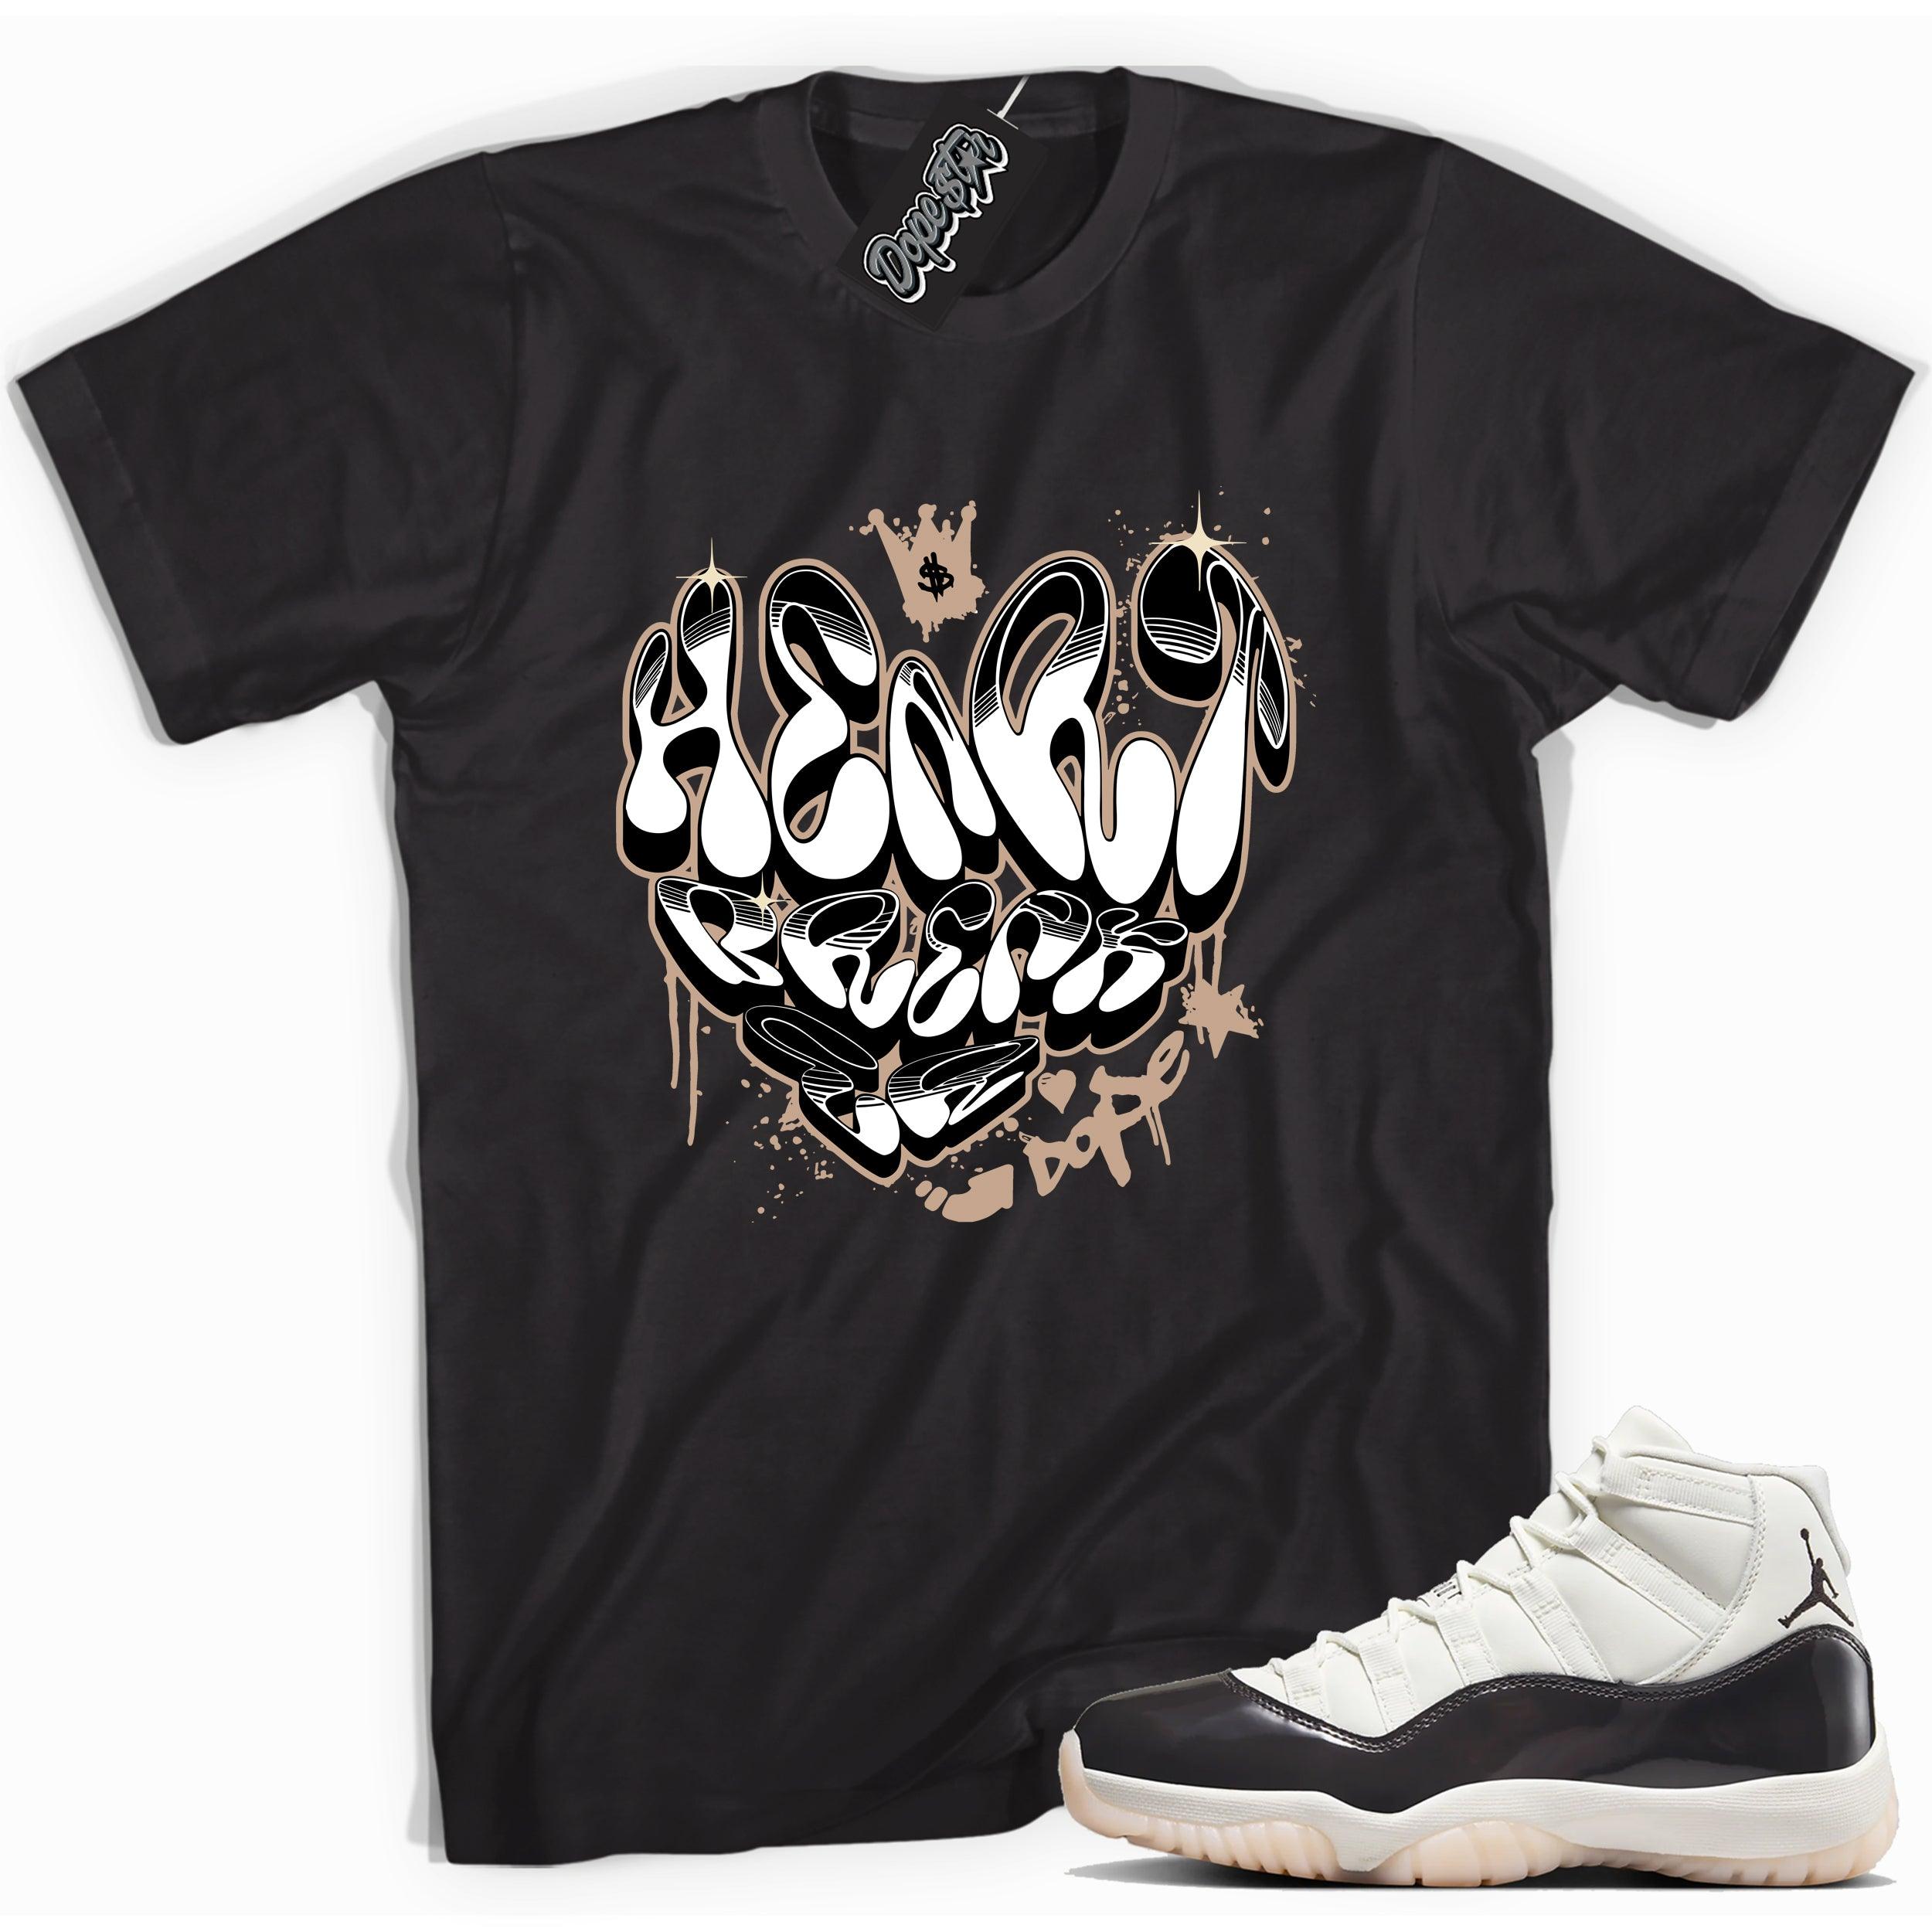 Cool Black graphic tee with “ Heart Breaker ” print, that perfectly matches Air Jordan 11 Neapolitan sneakers 